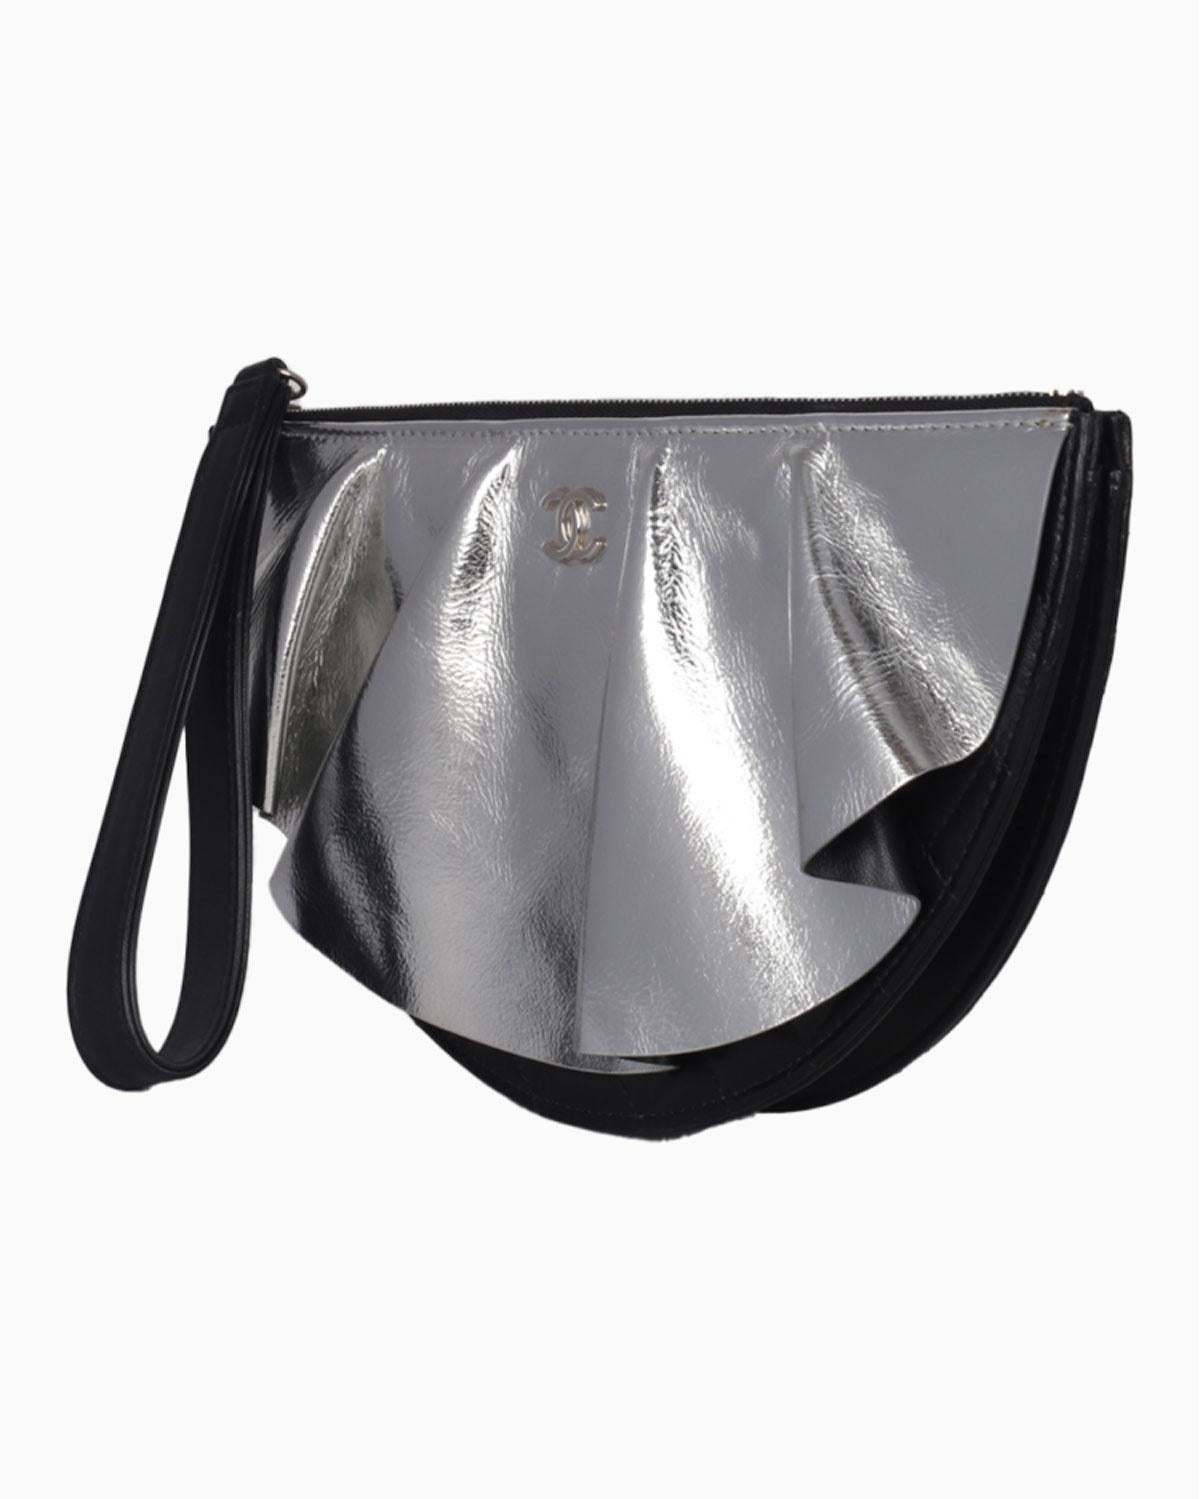 Chanel 2020 Half Circle Wrinkled Metallic Silver Lambskin Quilted Classic Clutch en vente 1